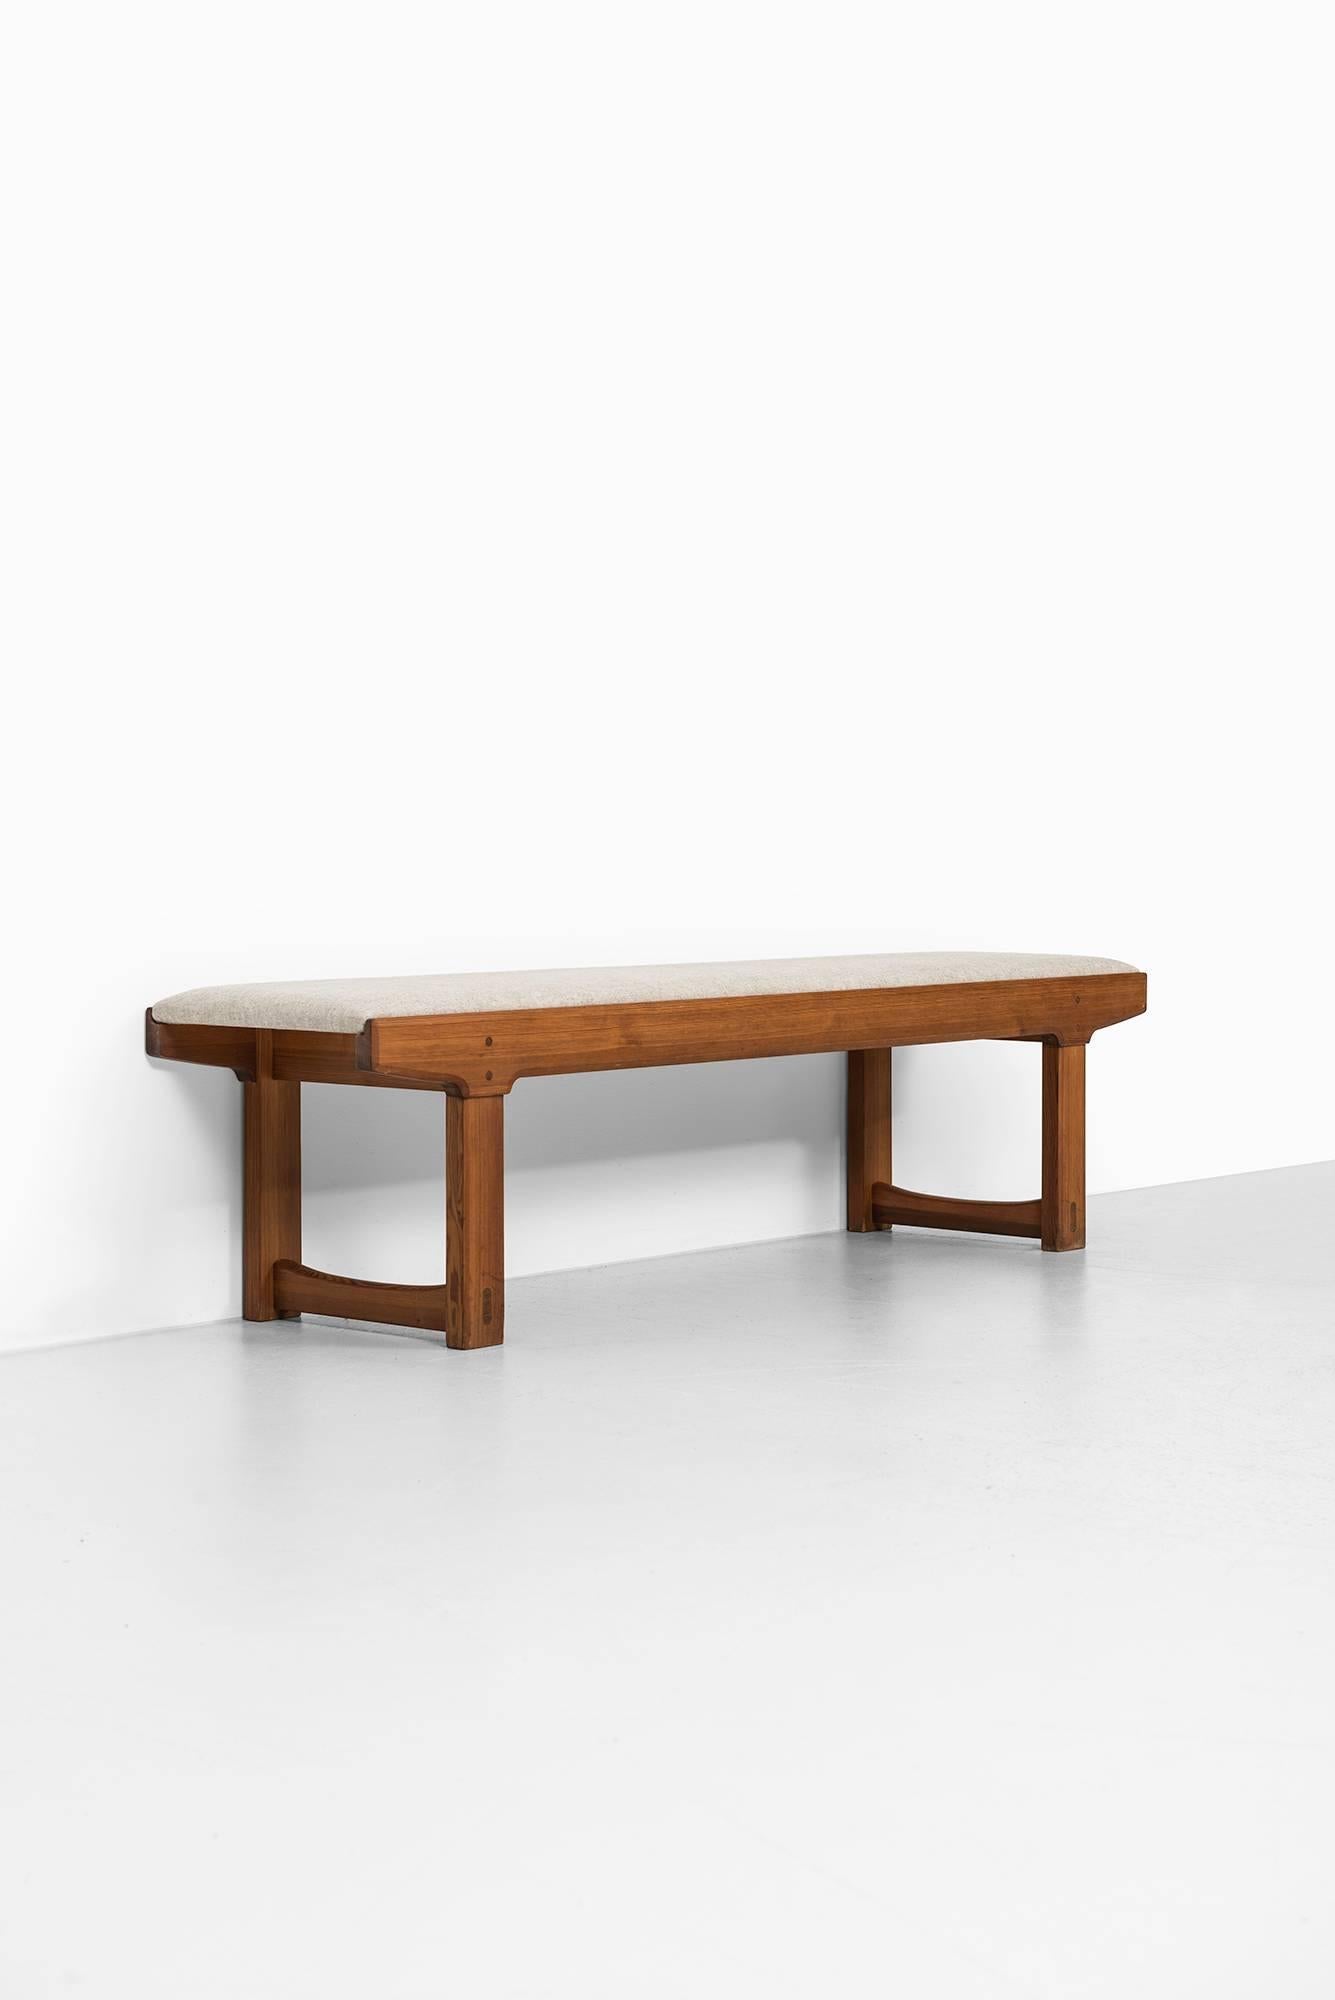 Rare bench in the manner of Carl Malmsten. Produced in Sweden.